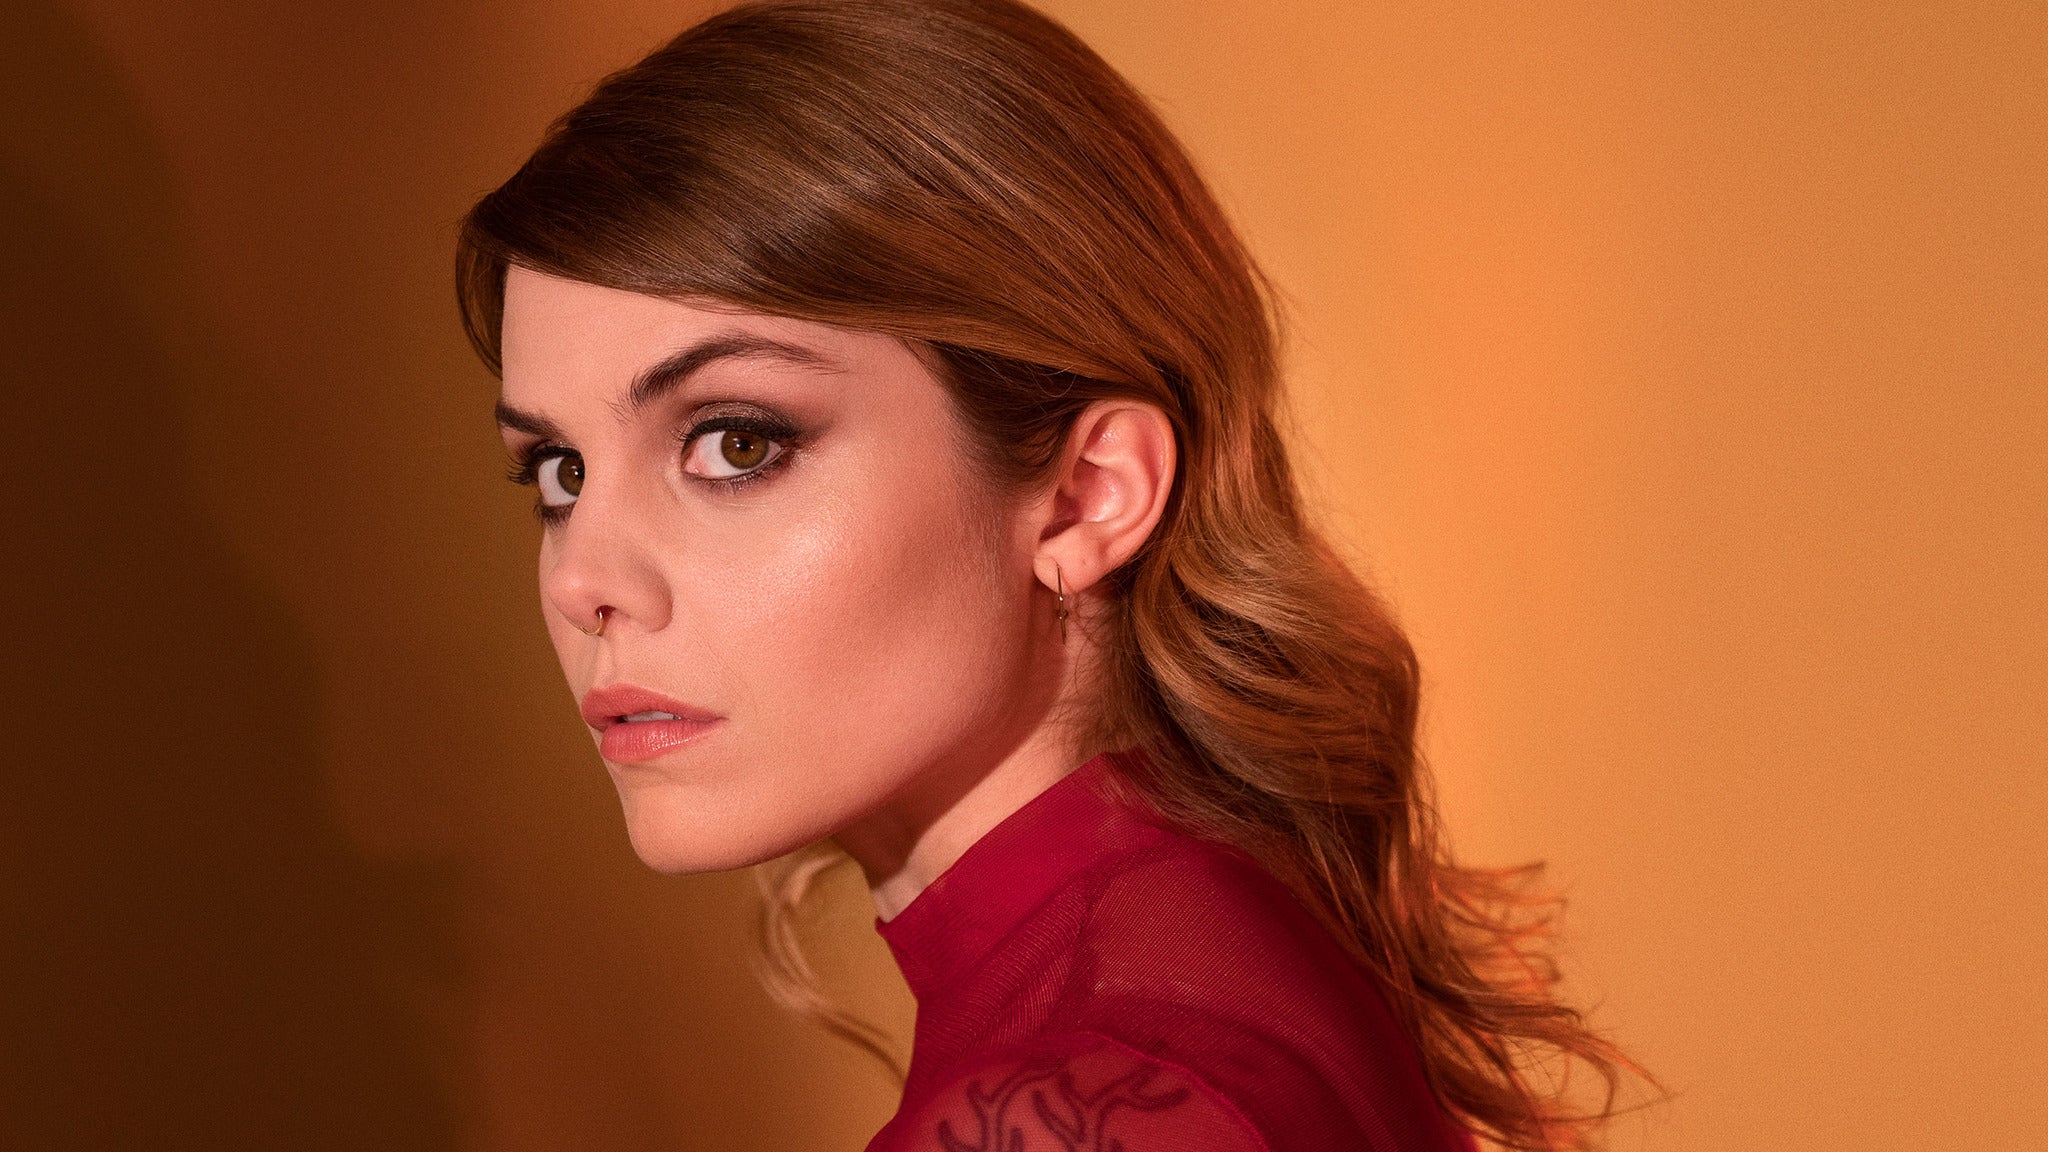 Image used with permission from Ticketmaster | Coeur De Pirate tickets